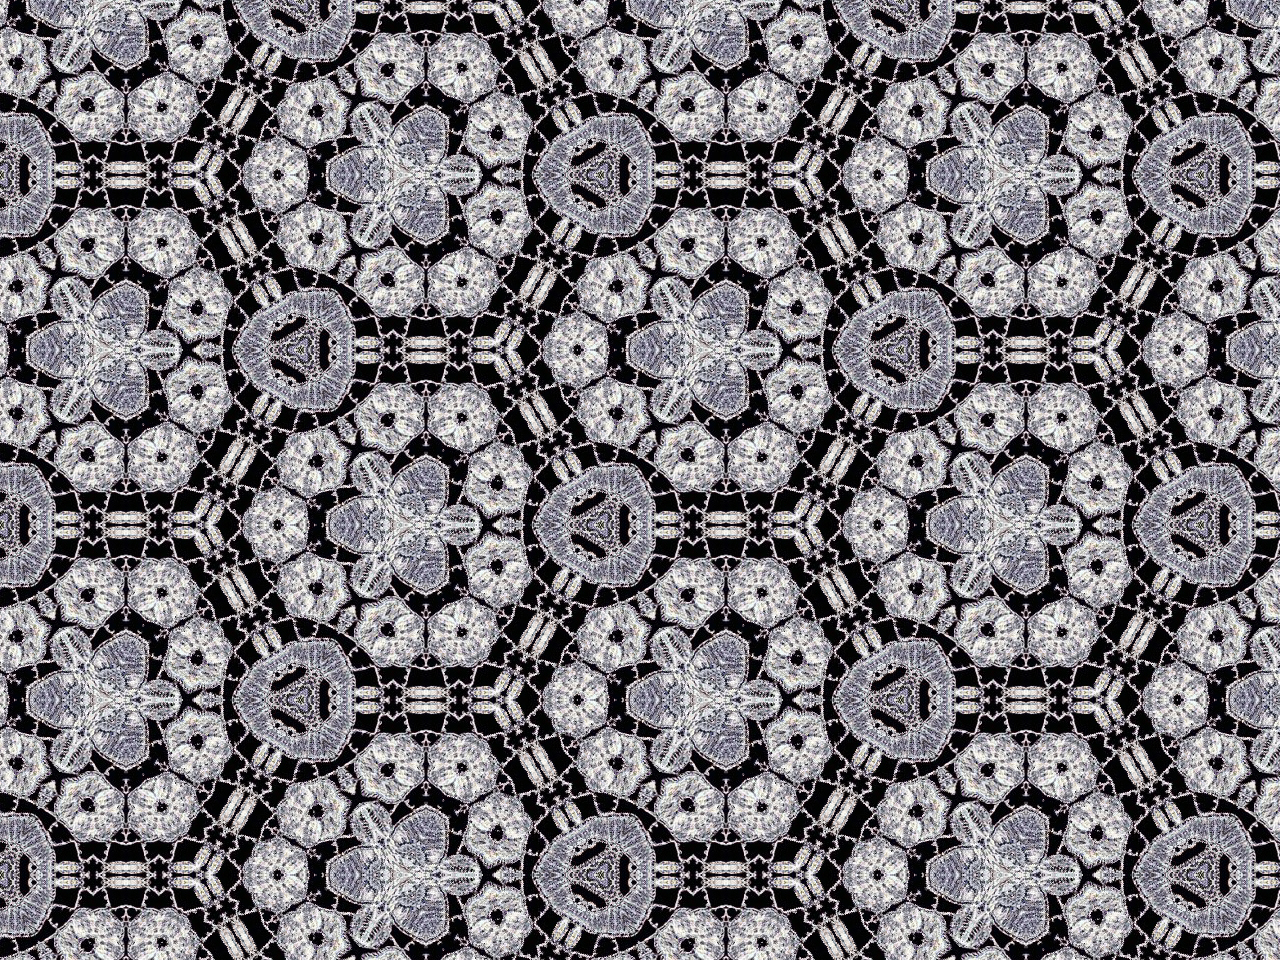 And White Lace Wallpaperwallpaper Blue Image Of Silver